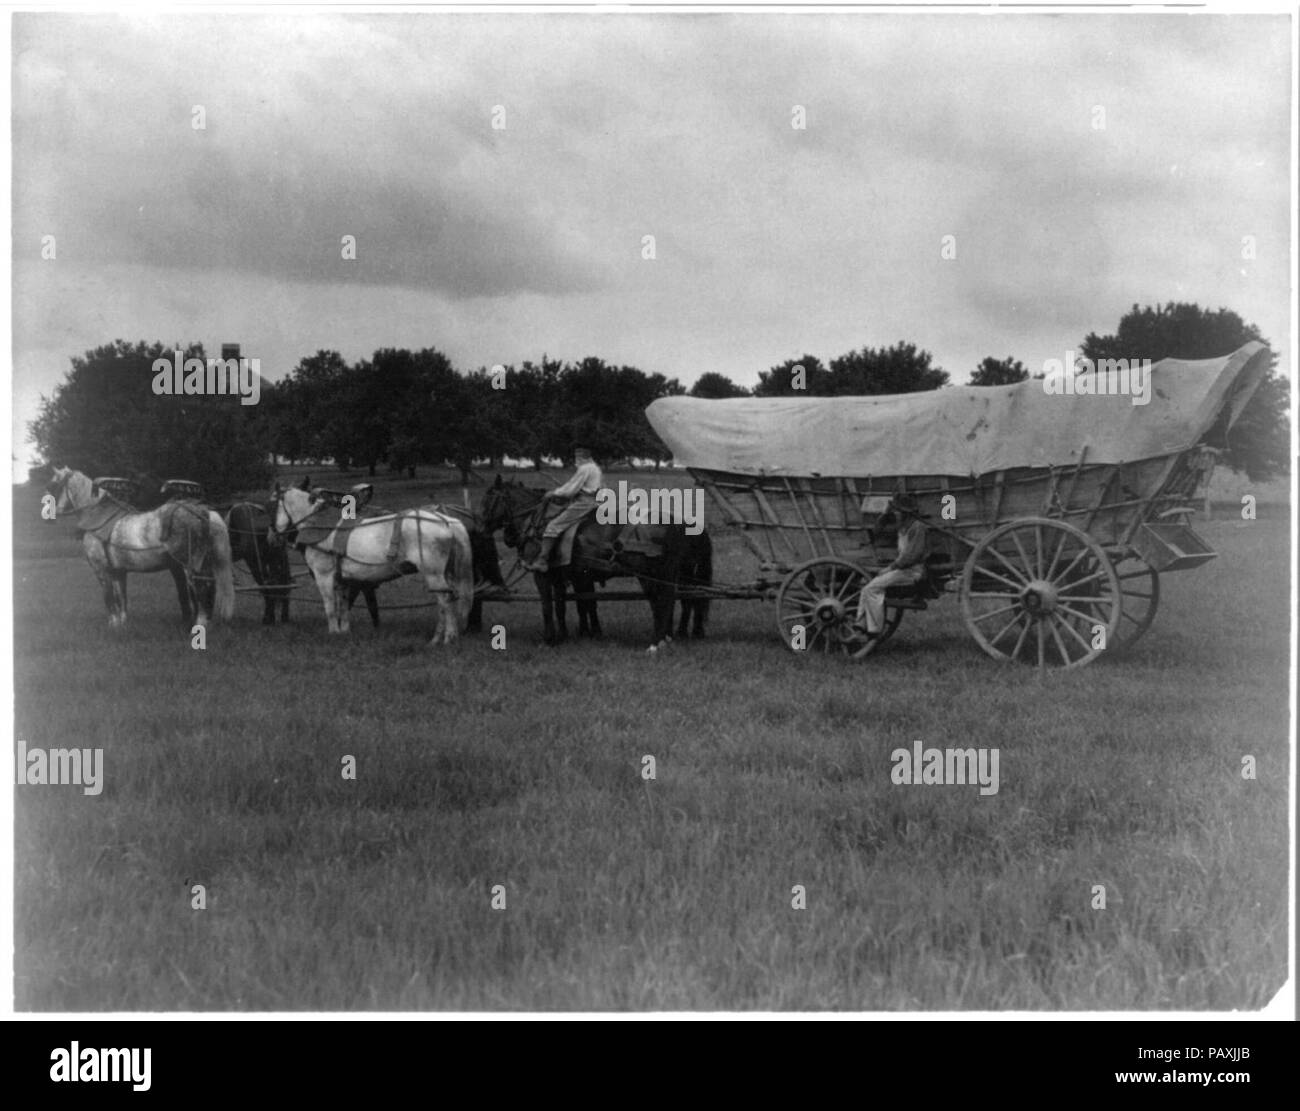 A Turnpike Schooner. This conestoga wagon was used for carrying freight on the National Pike Stock Photo